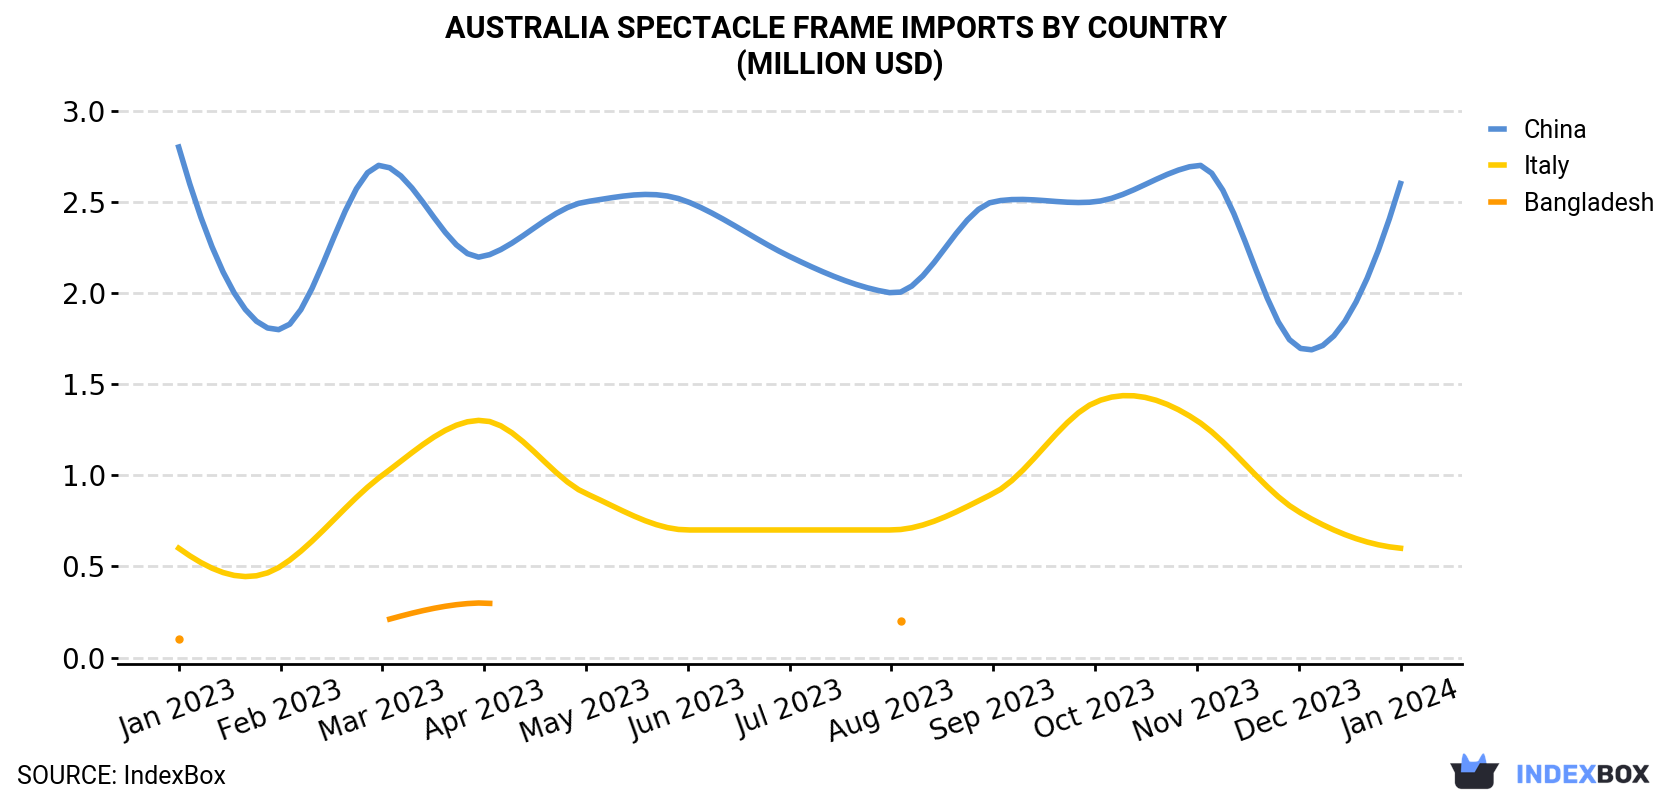 Australia Spectacle Frame Imports By Country (Million USD)